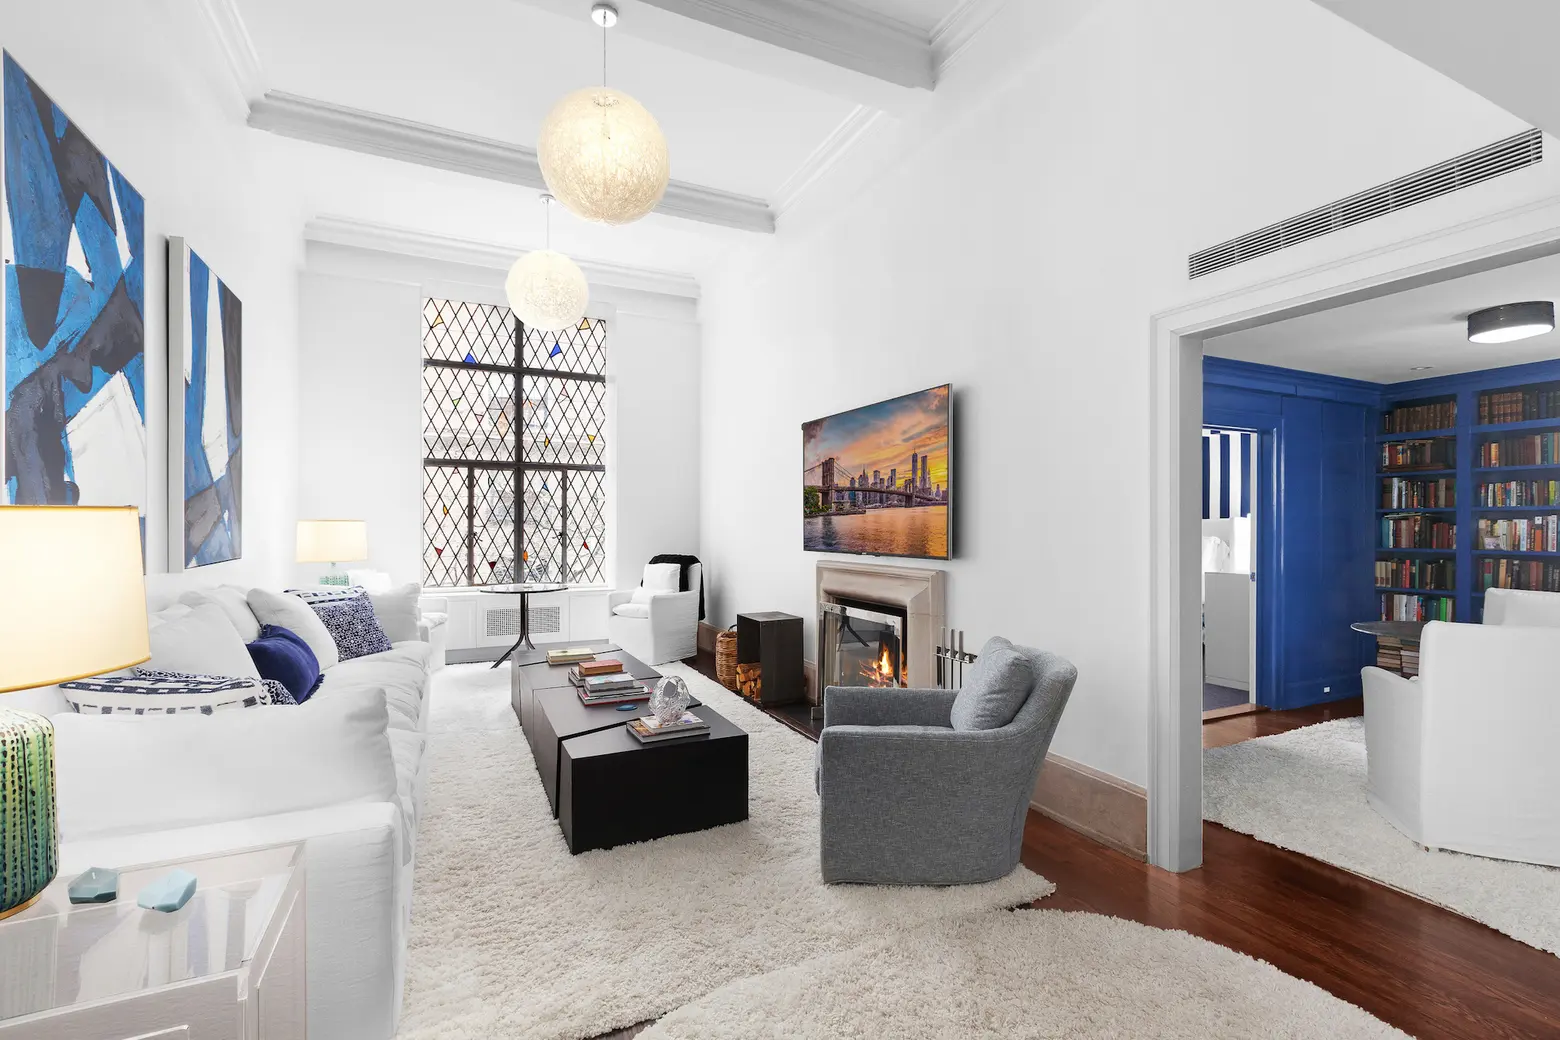 This $1.3M Upper East Side co-op has a secret powder room tucked behind a library wall